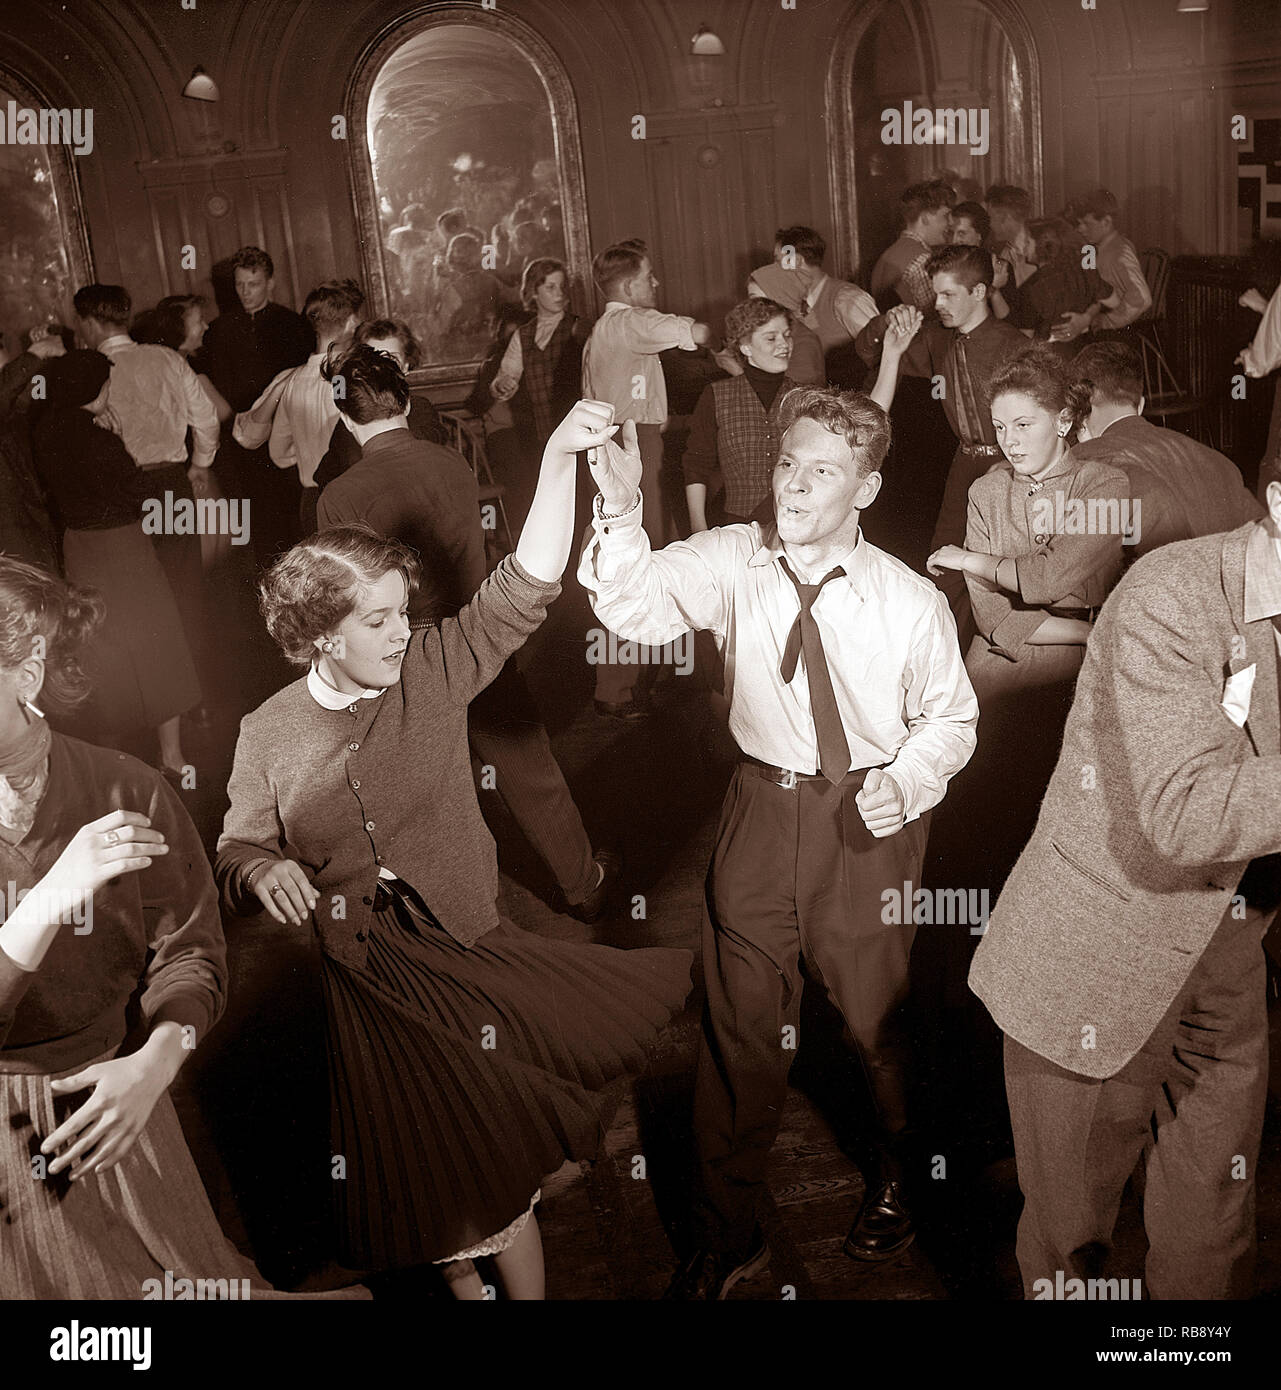 Dancing in the 1950s. The dance floor is filled with dancing couples moving to the music. Sweden 1953. Ref 2363 Stock Photo